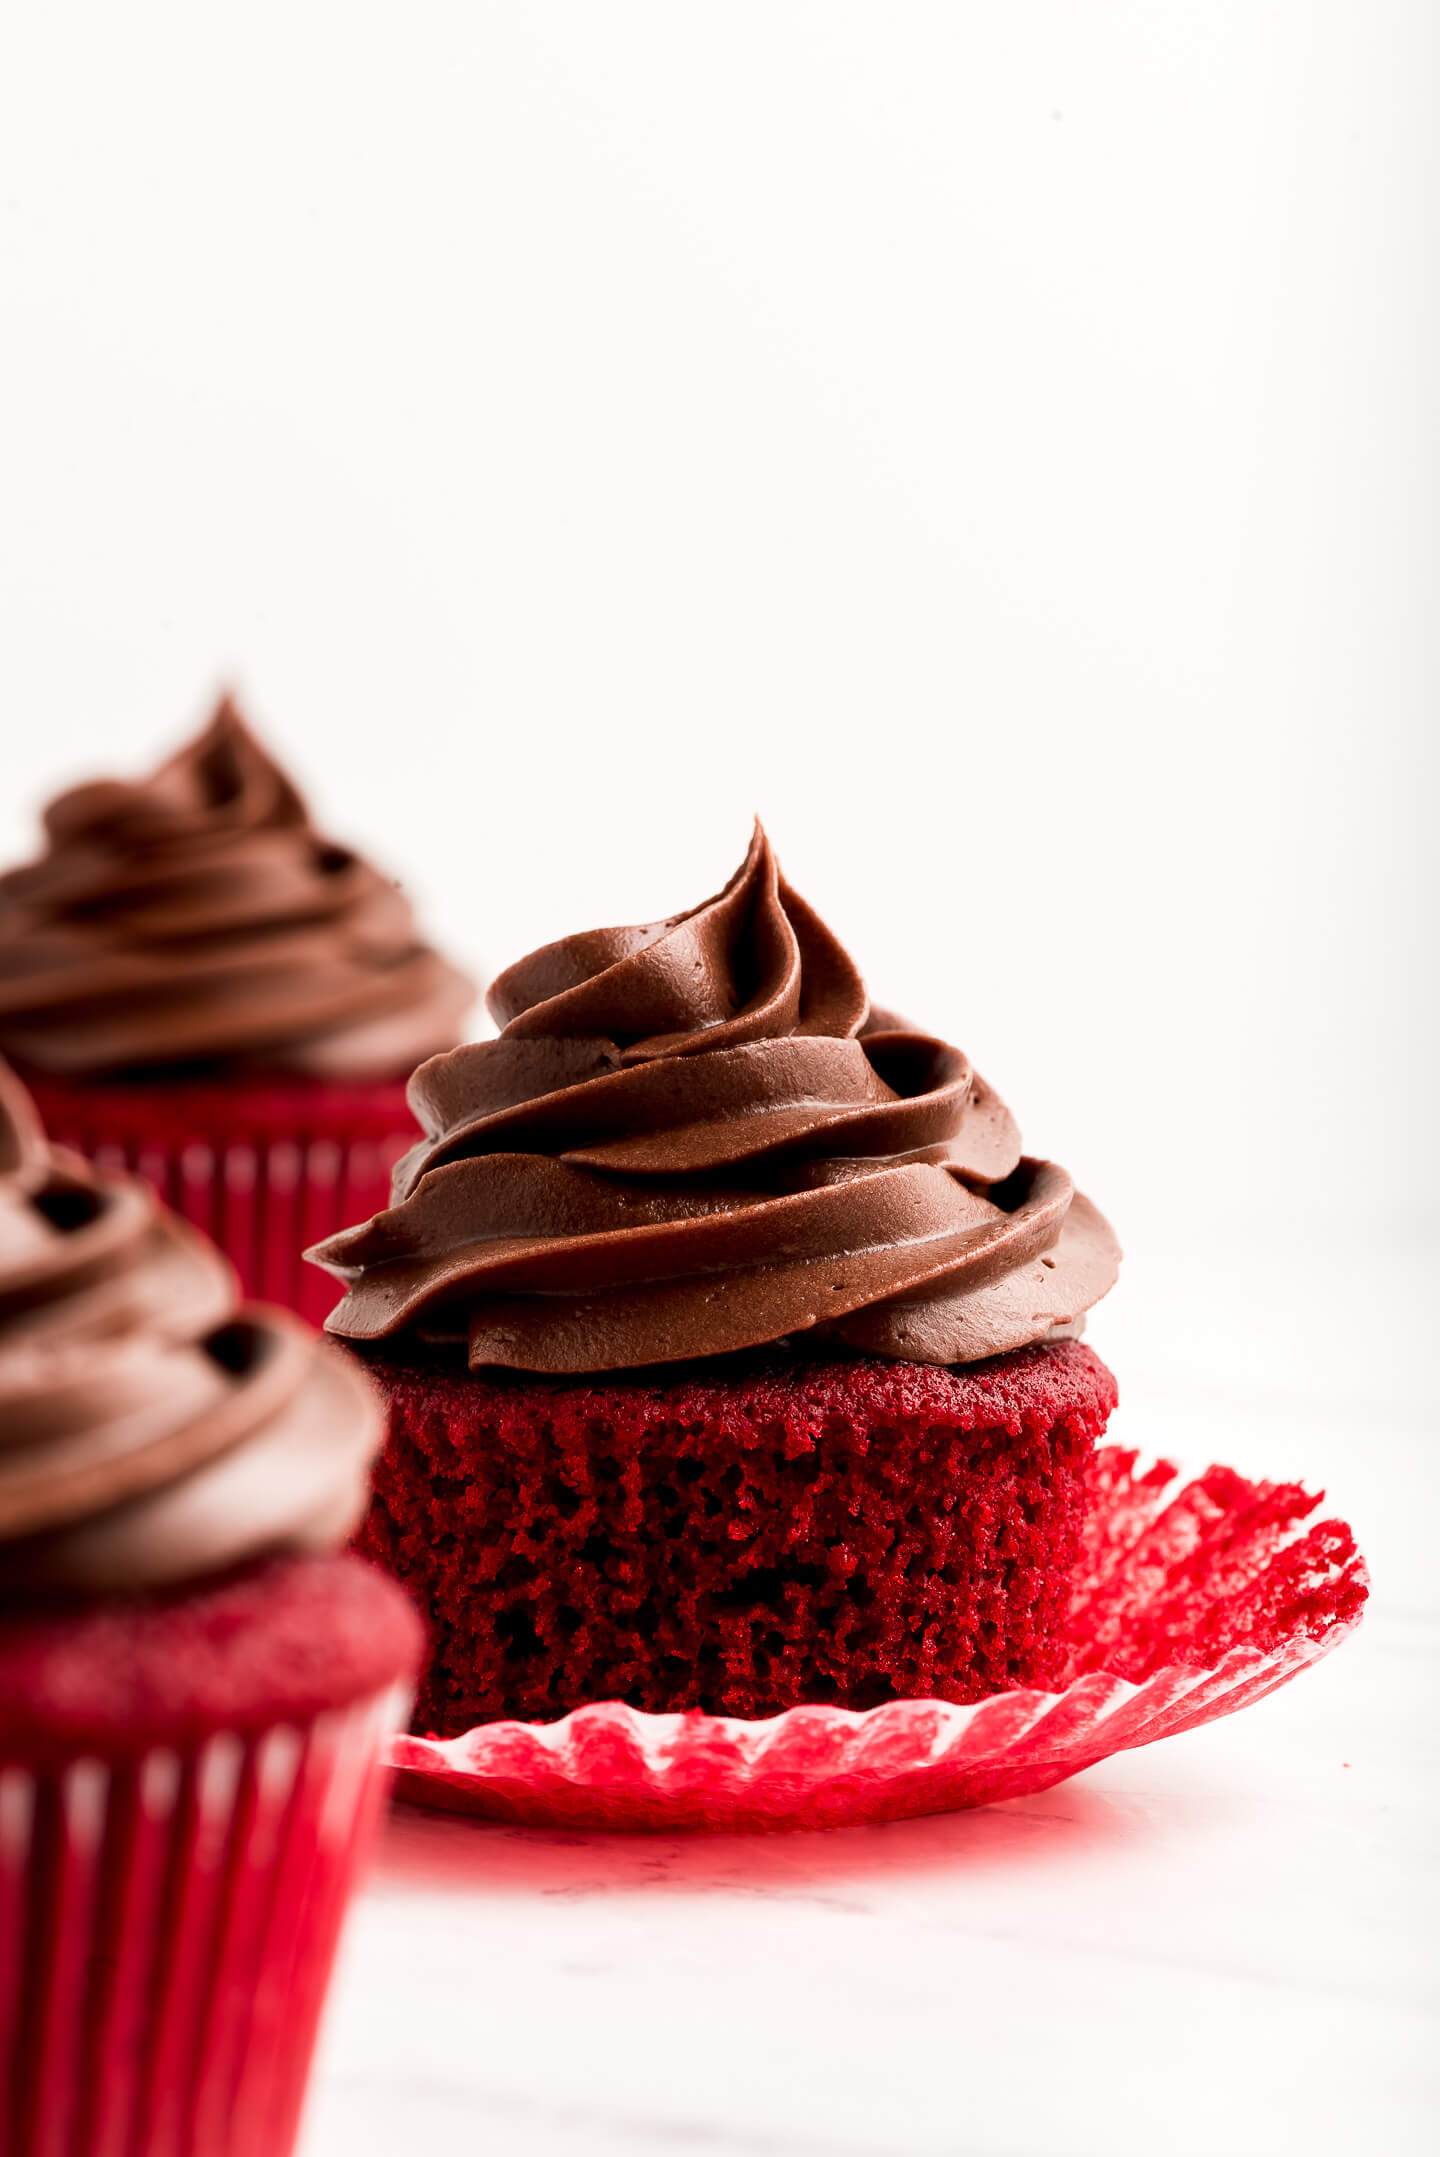 Red cupcake topped with Chocolate Cream Cheese Frosting.